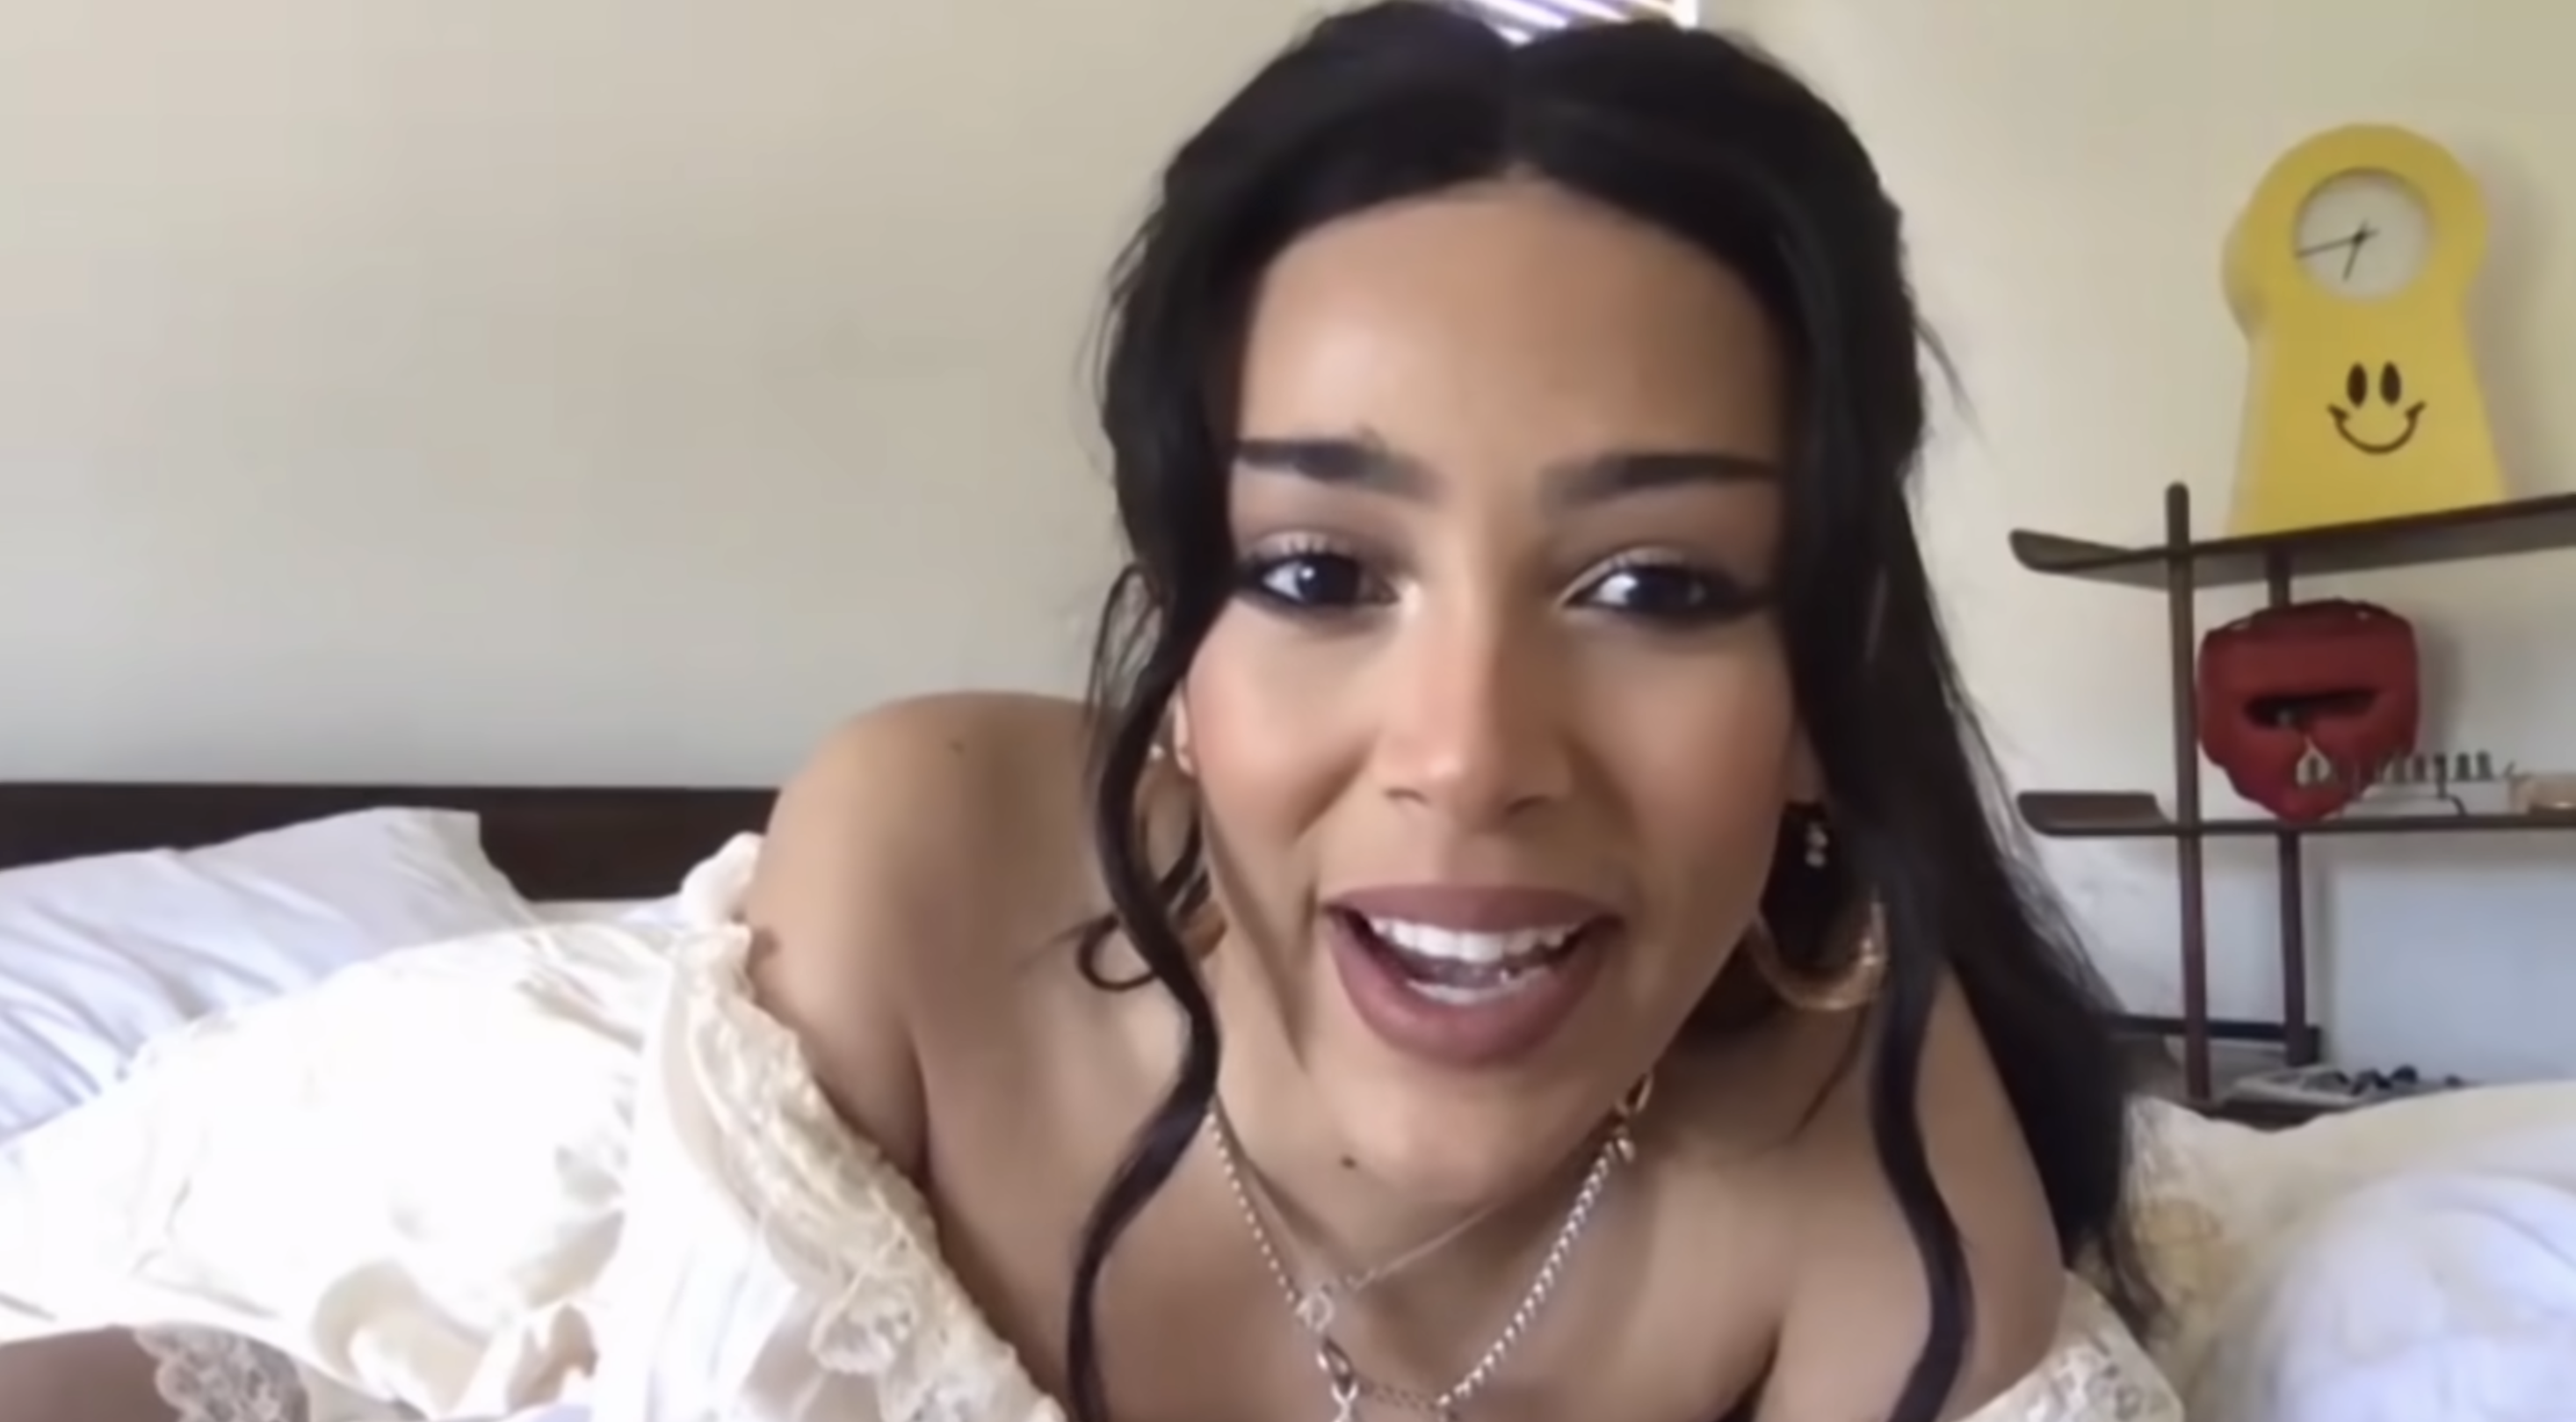 Woman in a white off-the-shoulder top with hoop earrings, smiling during a video call